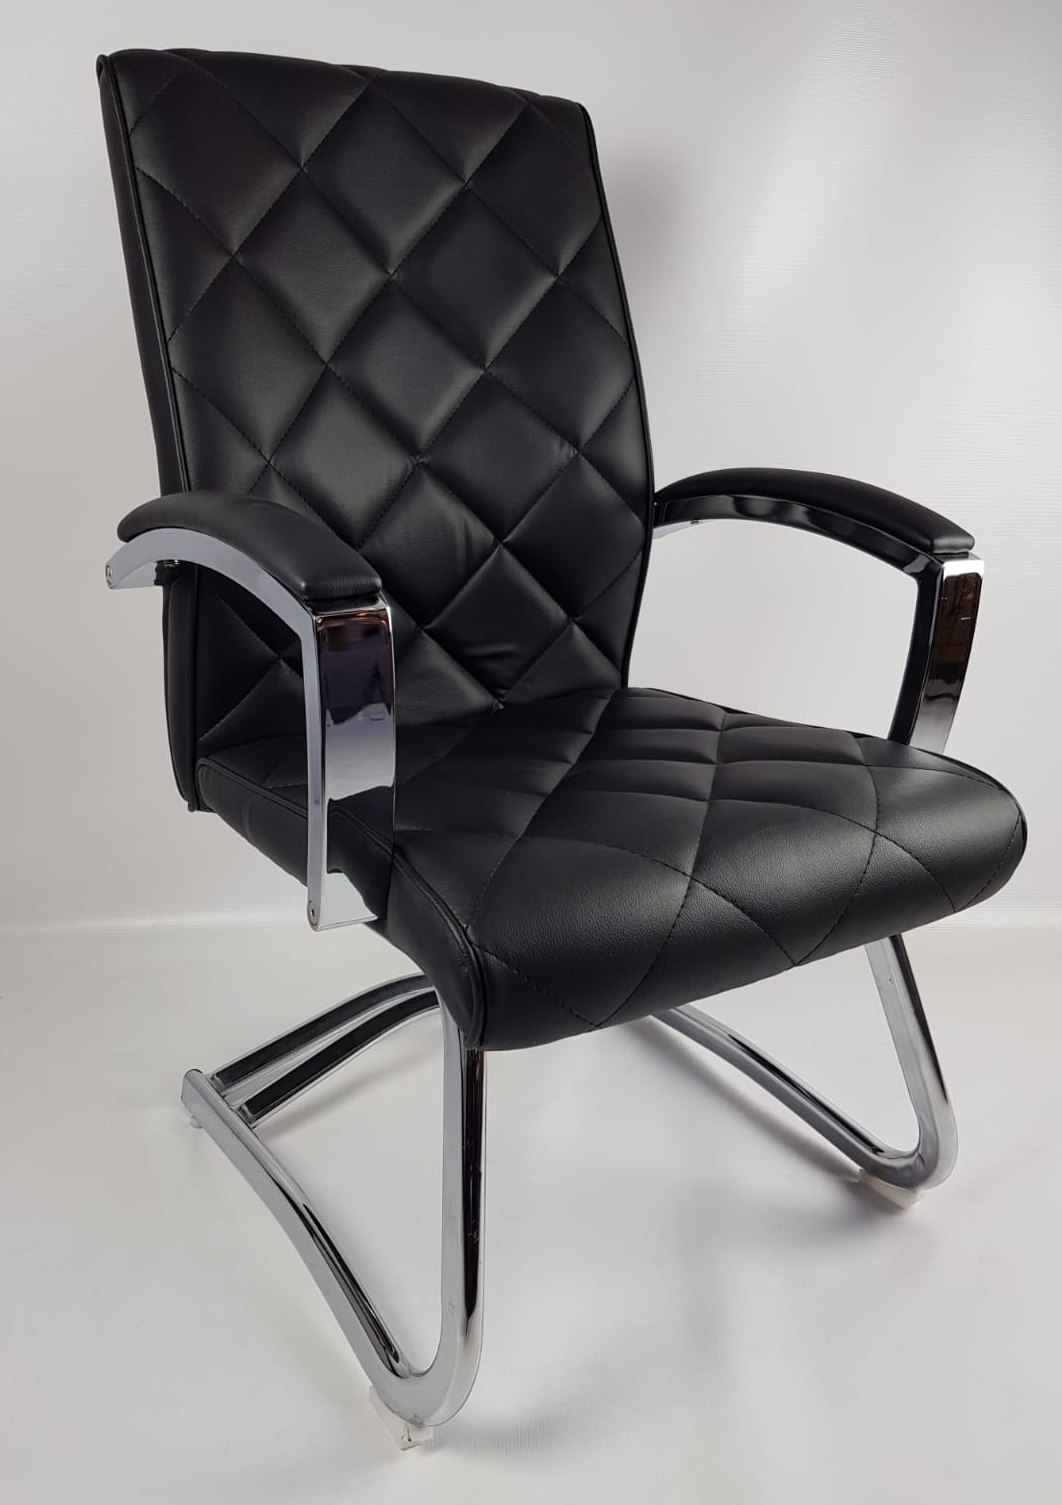 Quilted Black Leather Stylish Cantilever Visitors Chair - ZV-B217 UK